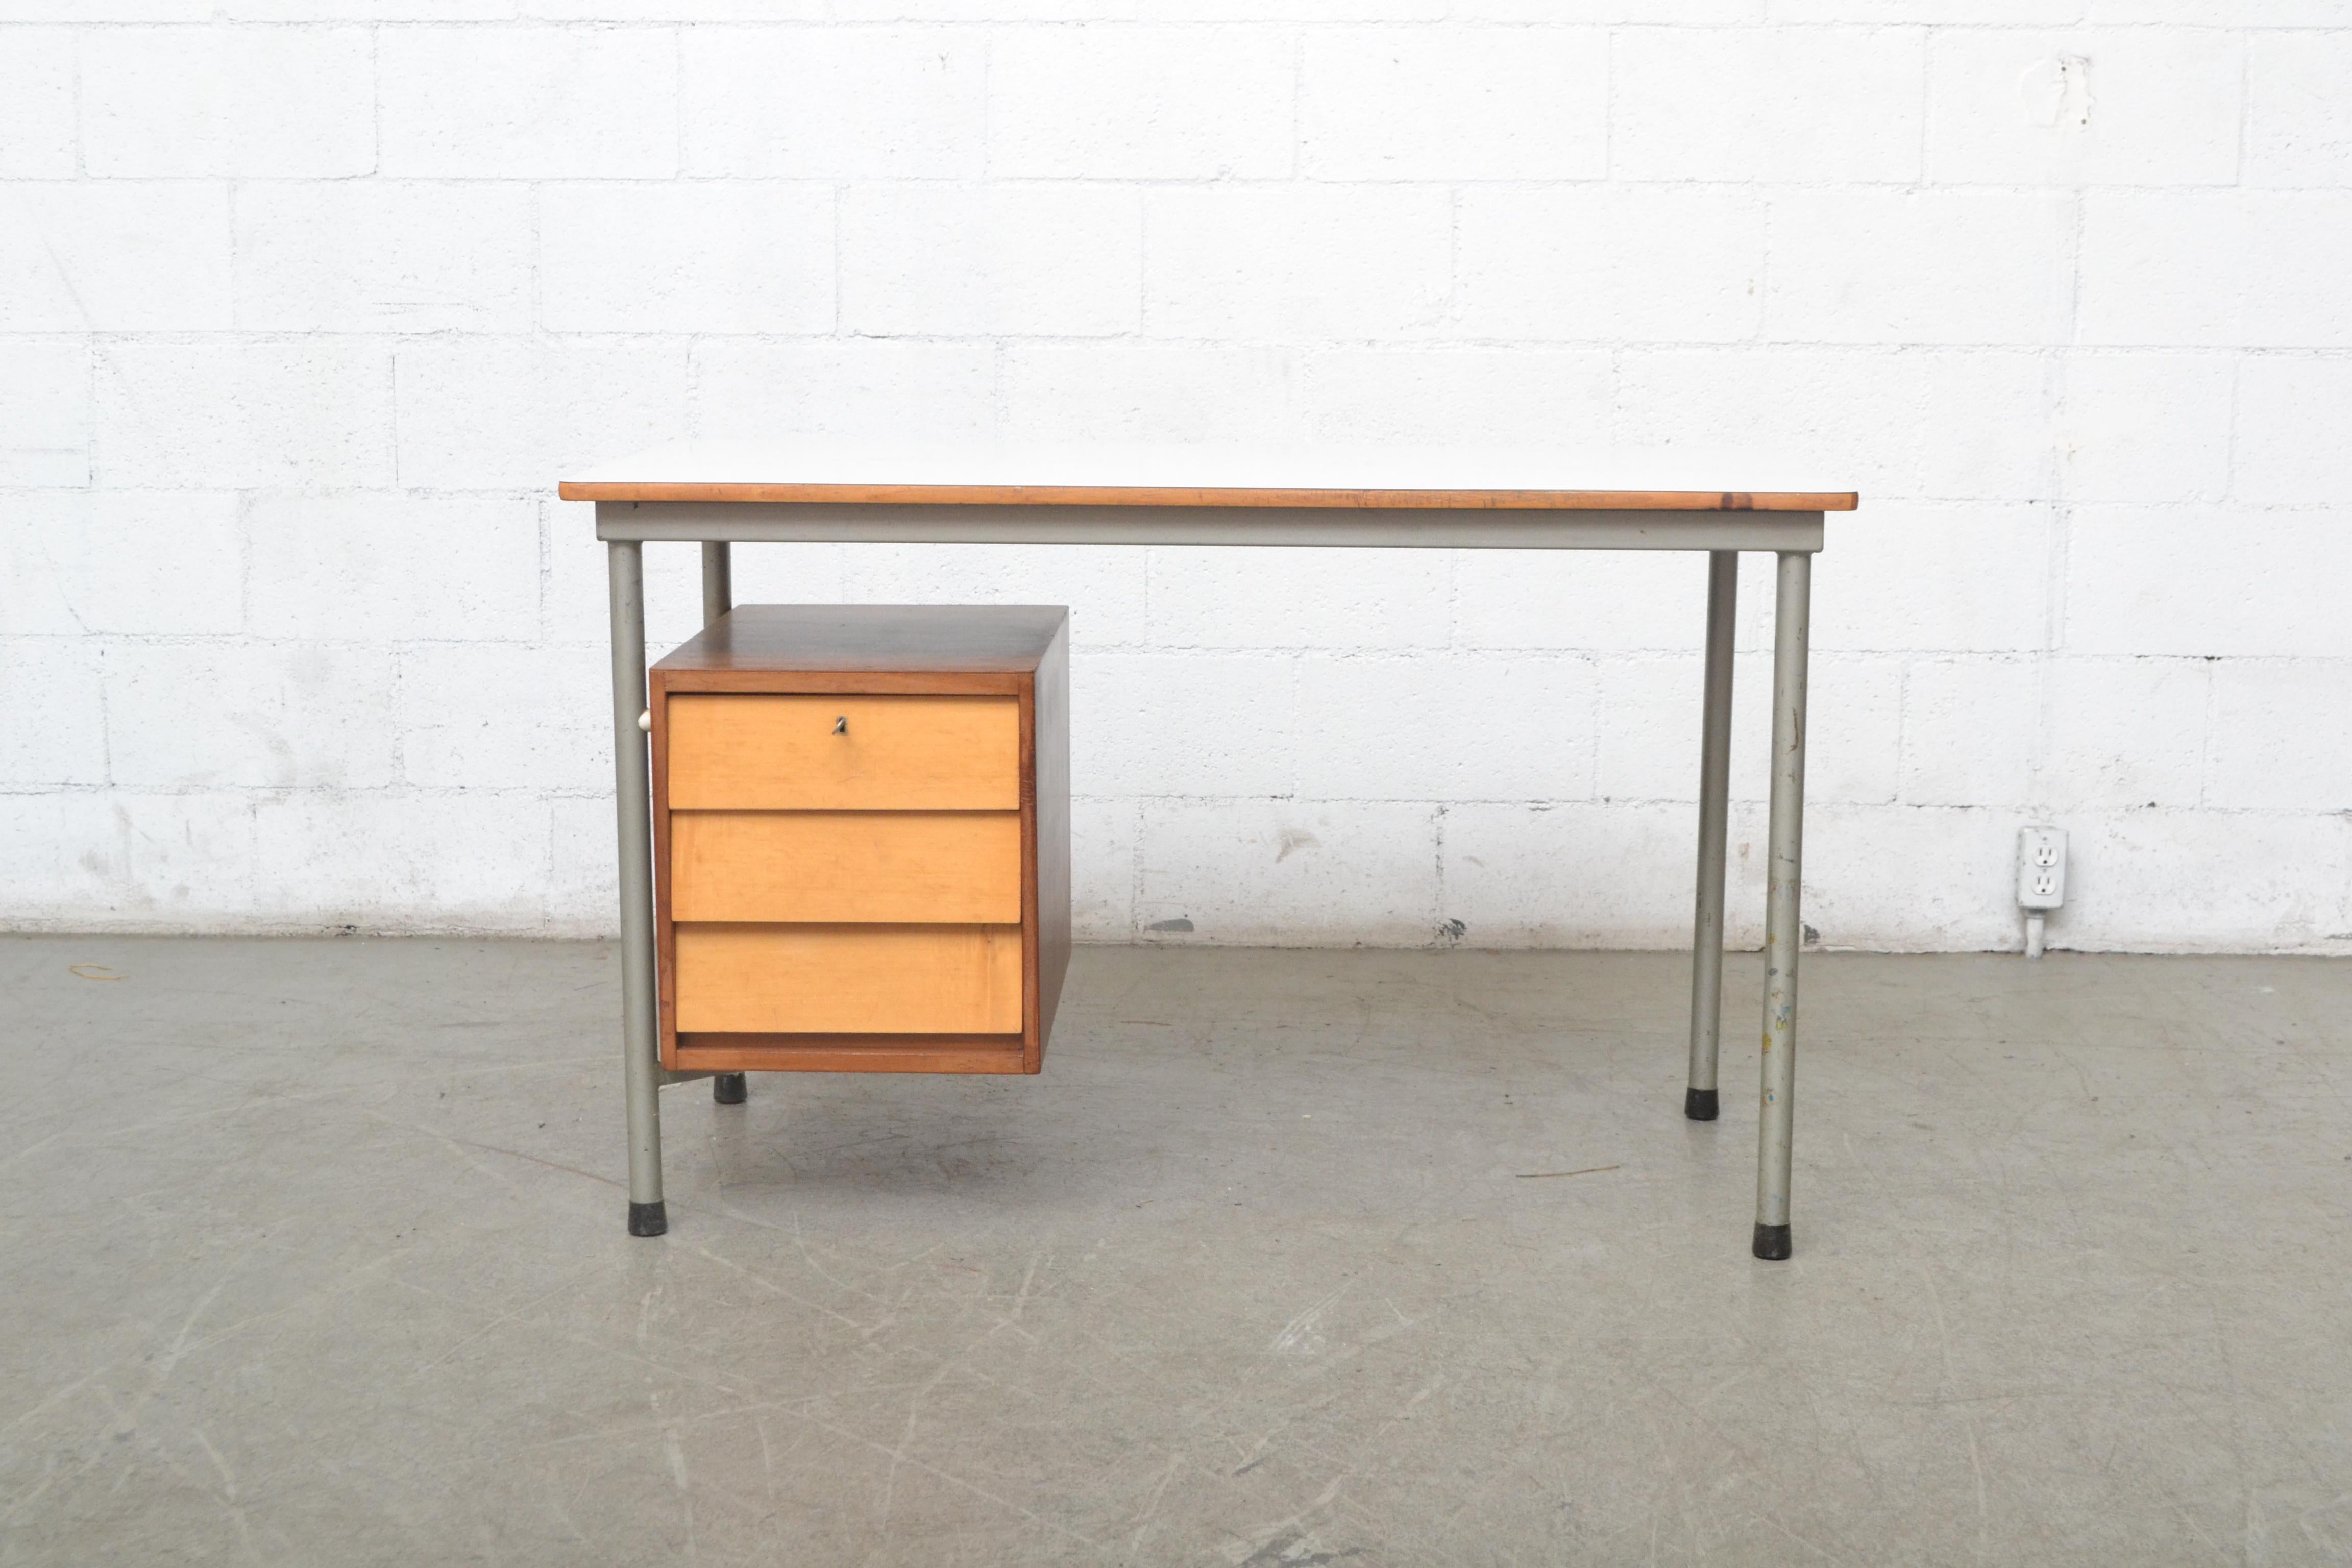 Modernist Dutch industrial desk with suspended drawer cabinet. Lightly refinished two-toned wood; Teak exterior with three birch faced drawers. Original white formica top. In very original condition with visible wear and tear to the entire desk.